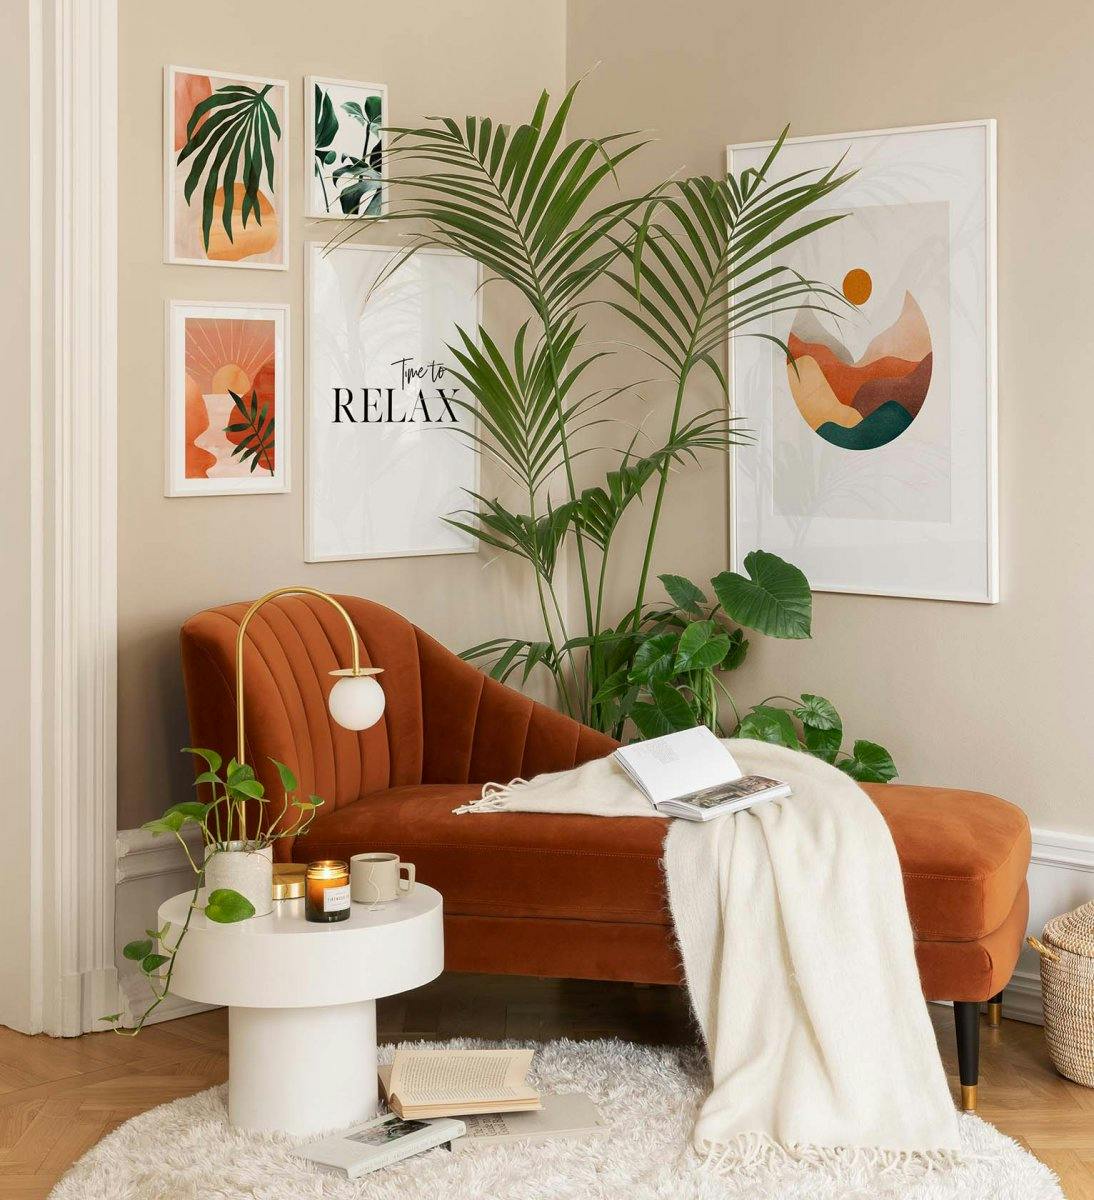 Graphic gallery wall in eye-catching orange and green colors for the living room